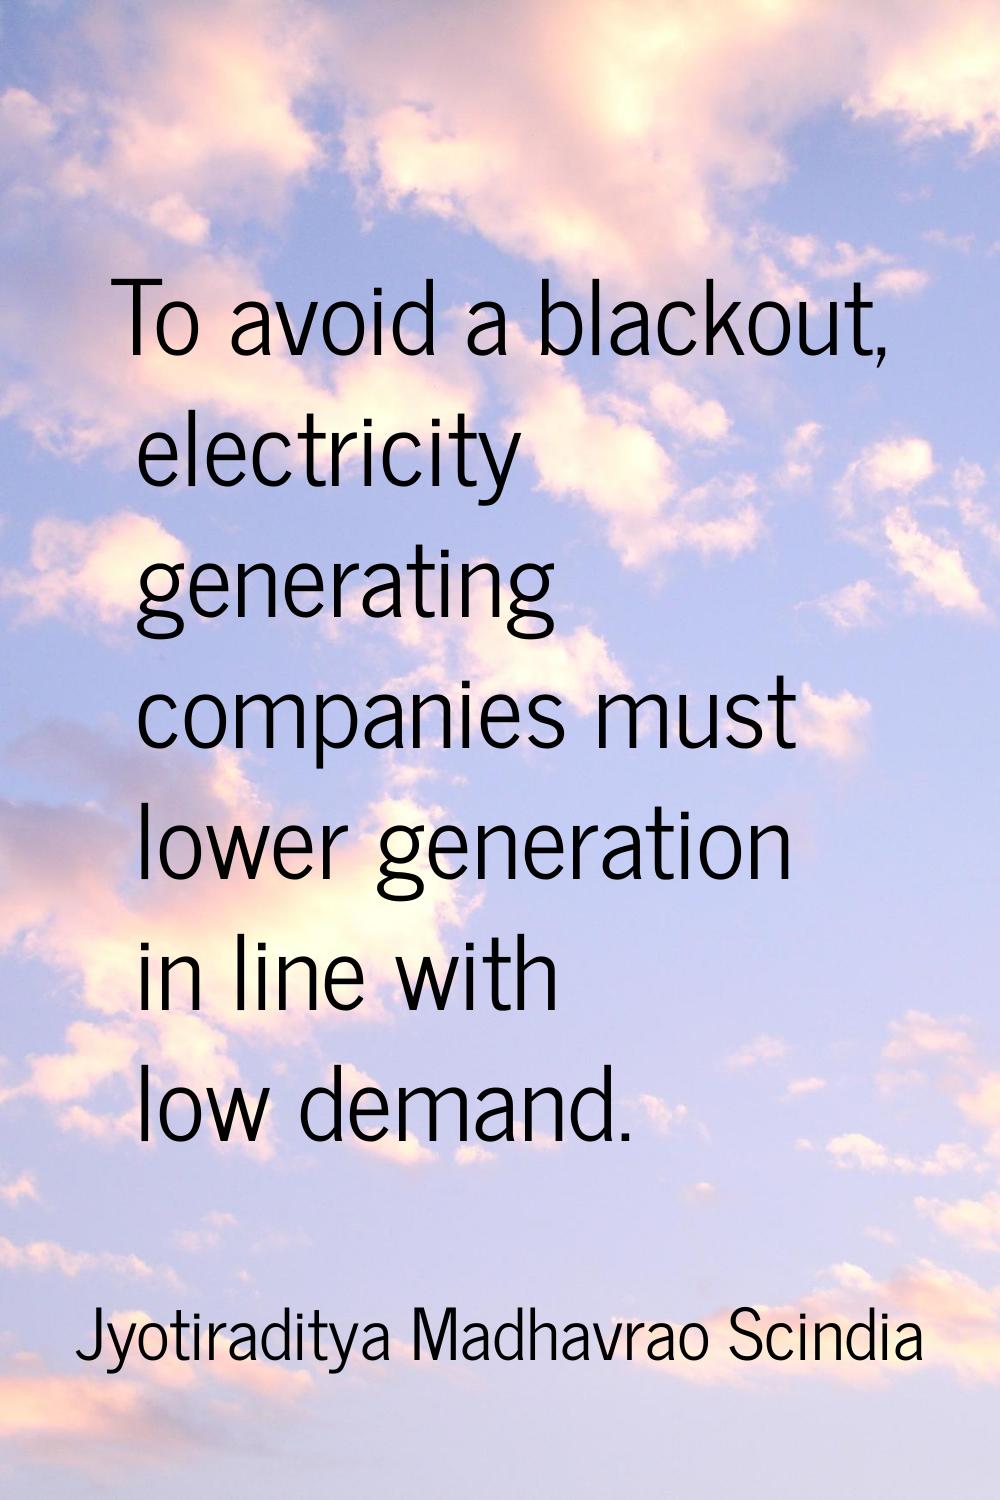 To avoid a blackout, electricity generating companies must lower generation in line with low demand